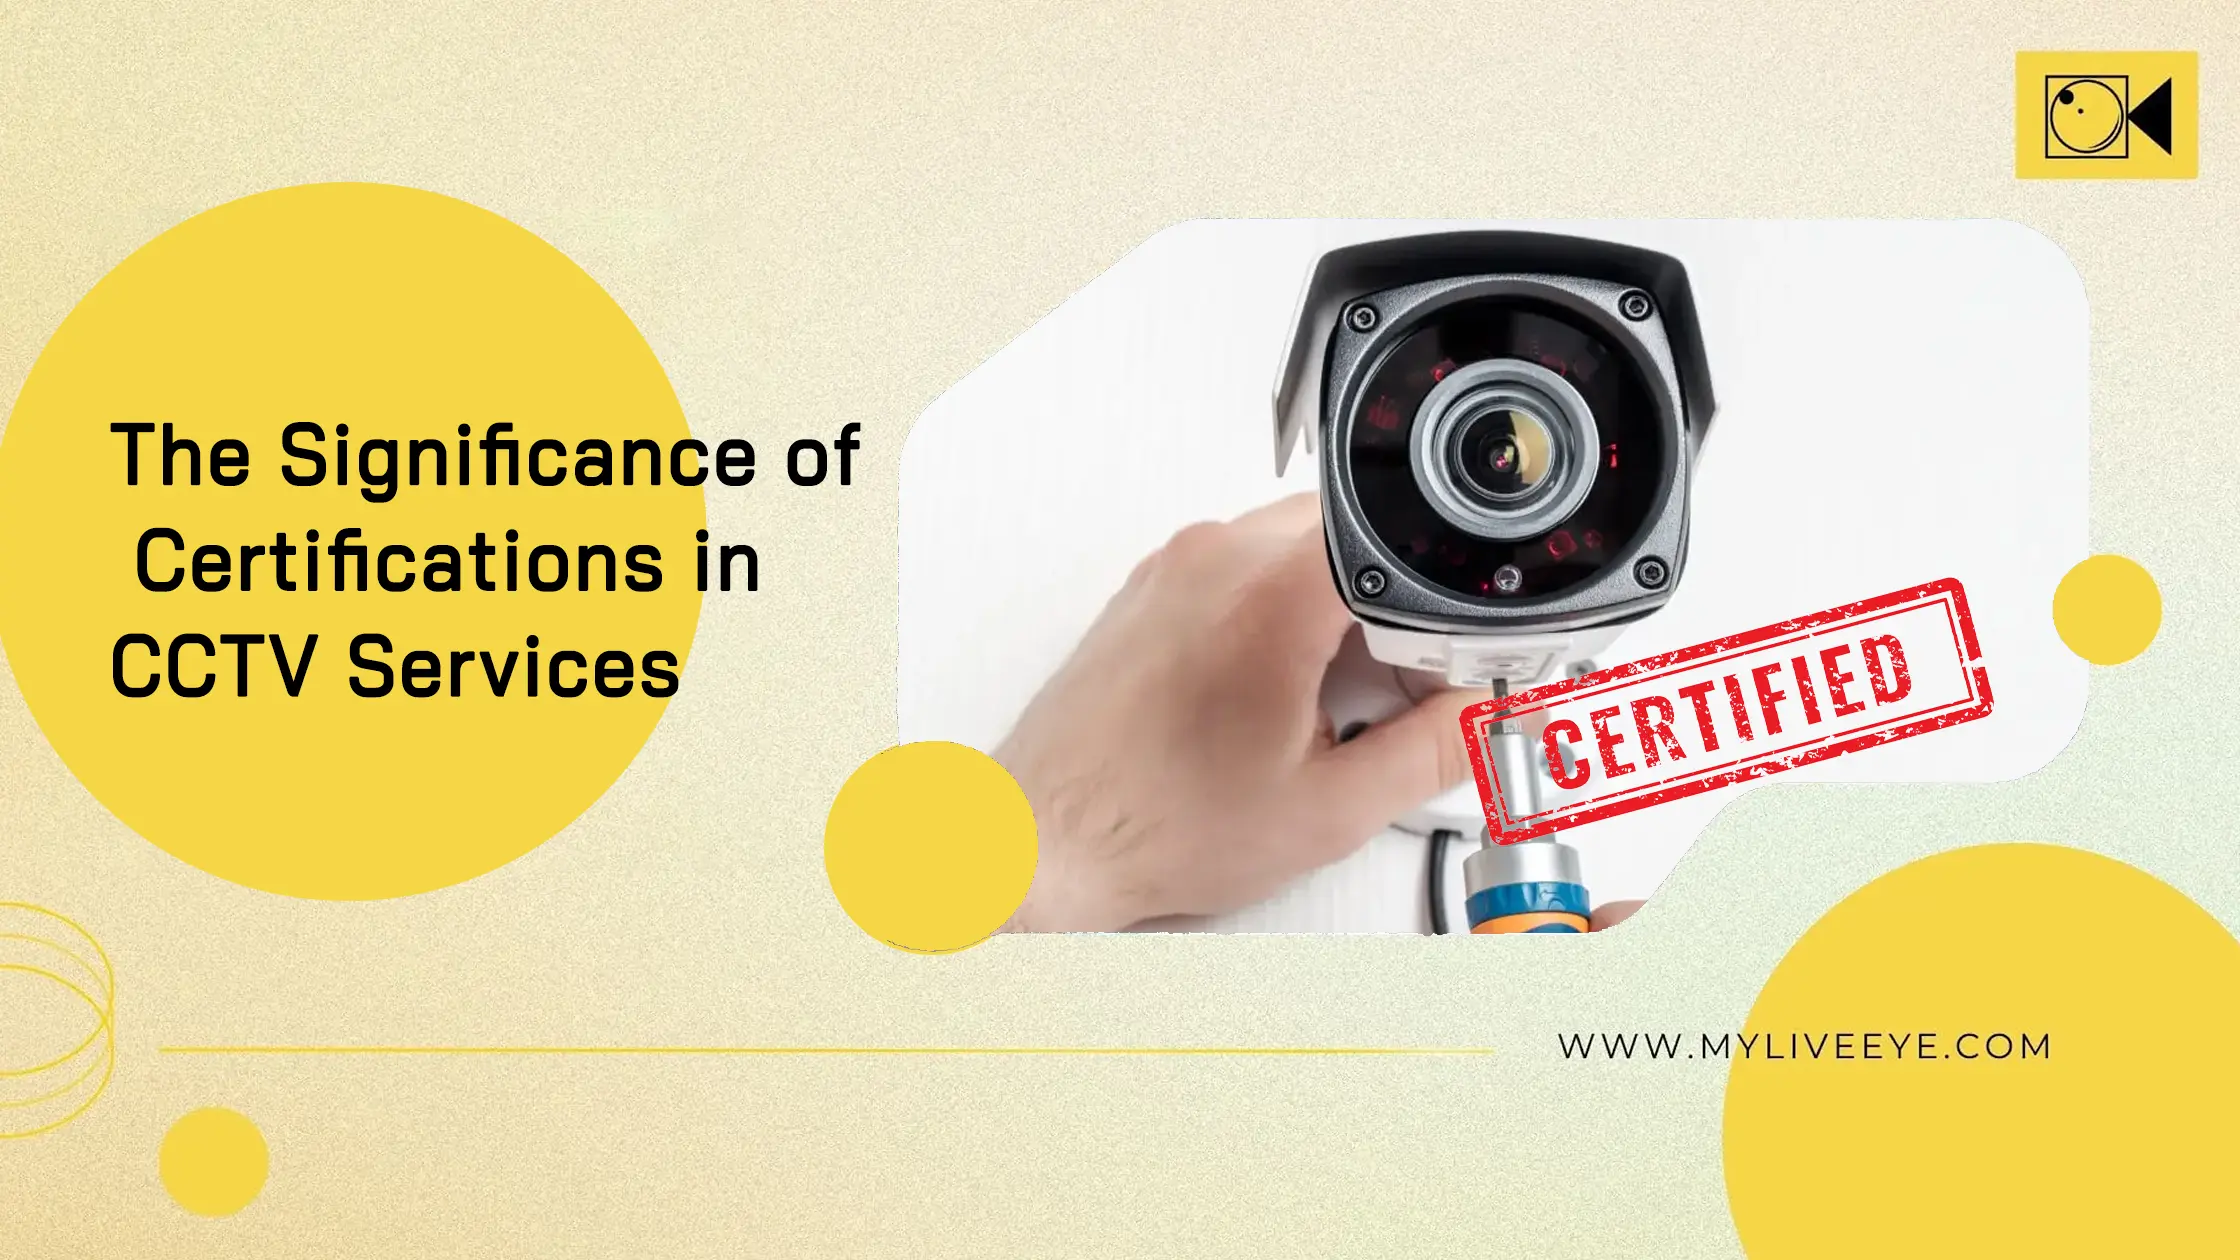 The Significance of Certifications in CCTV Services